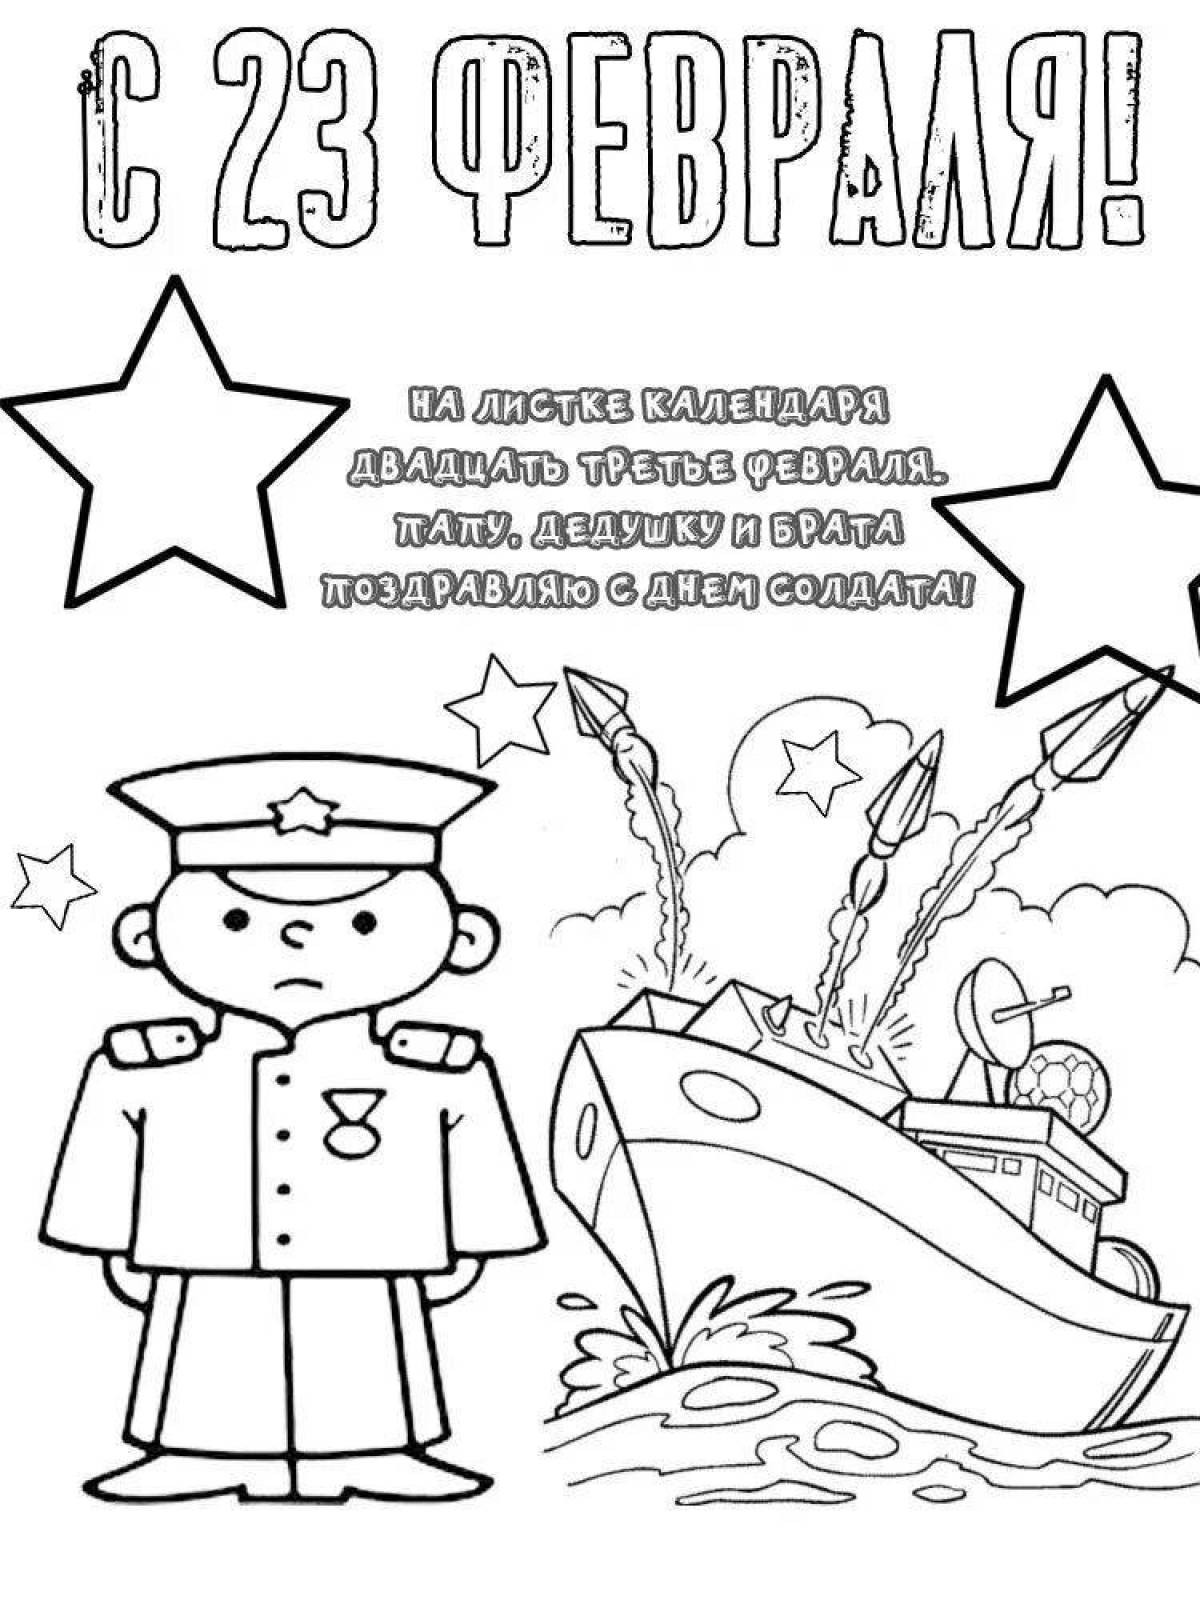 Creative coloring book for February 23 in elementary school